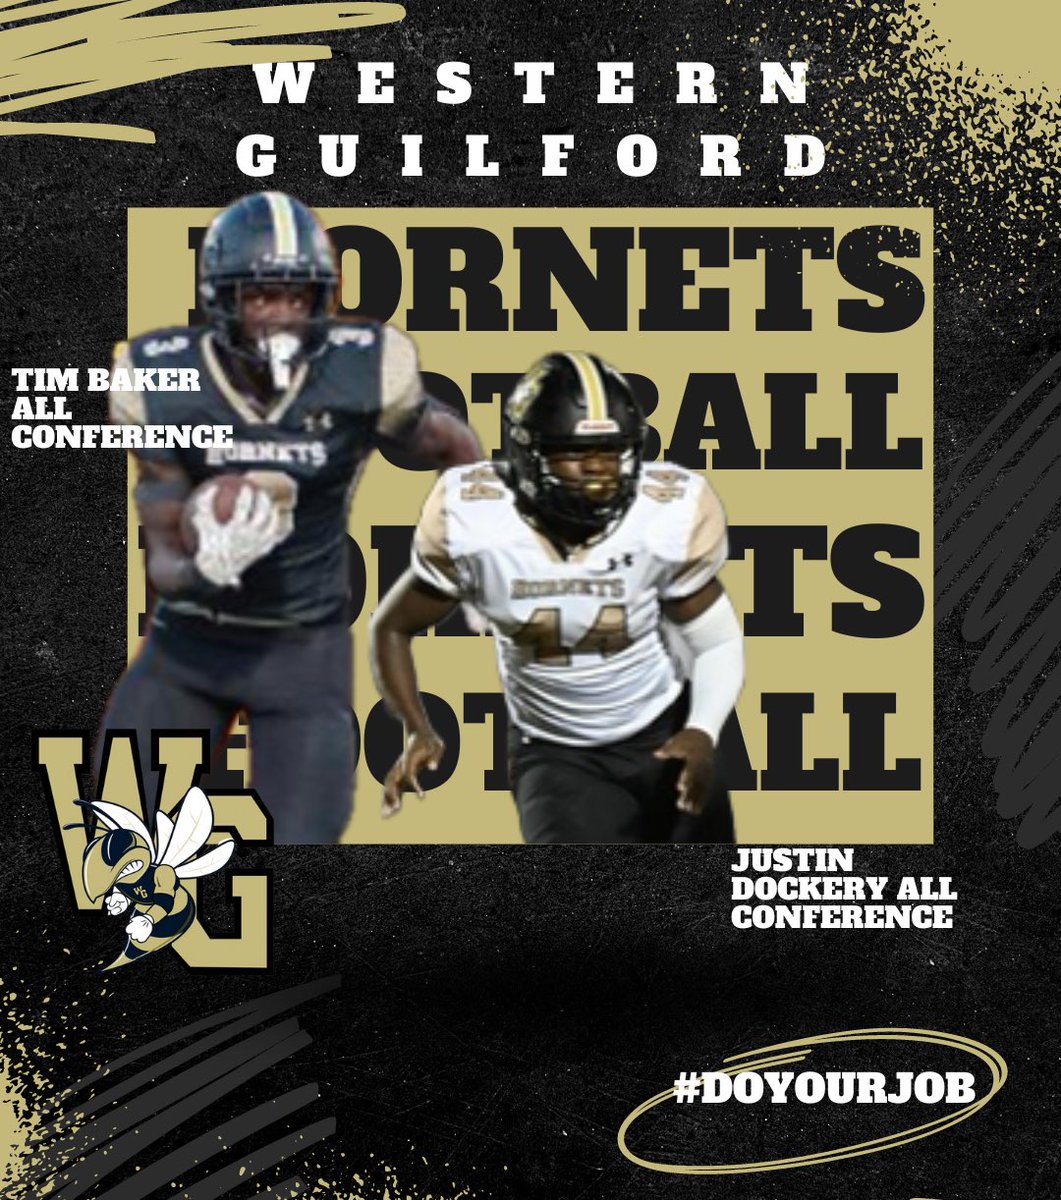 All Conference studs led the way for the Western Guildford. Timothy Baker accounted for 879 yards 8 total TDs as a sophomore. Justin Dockery had 100 tackles with 18 TFL. Both are poised for big junior seasons. Looking forward to following. #GoHornets #DoYourJob @WesternGuilfor2